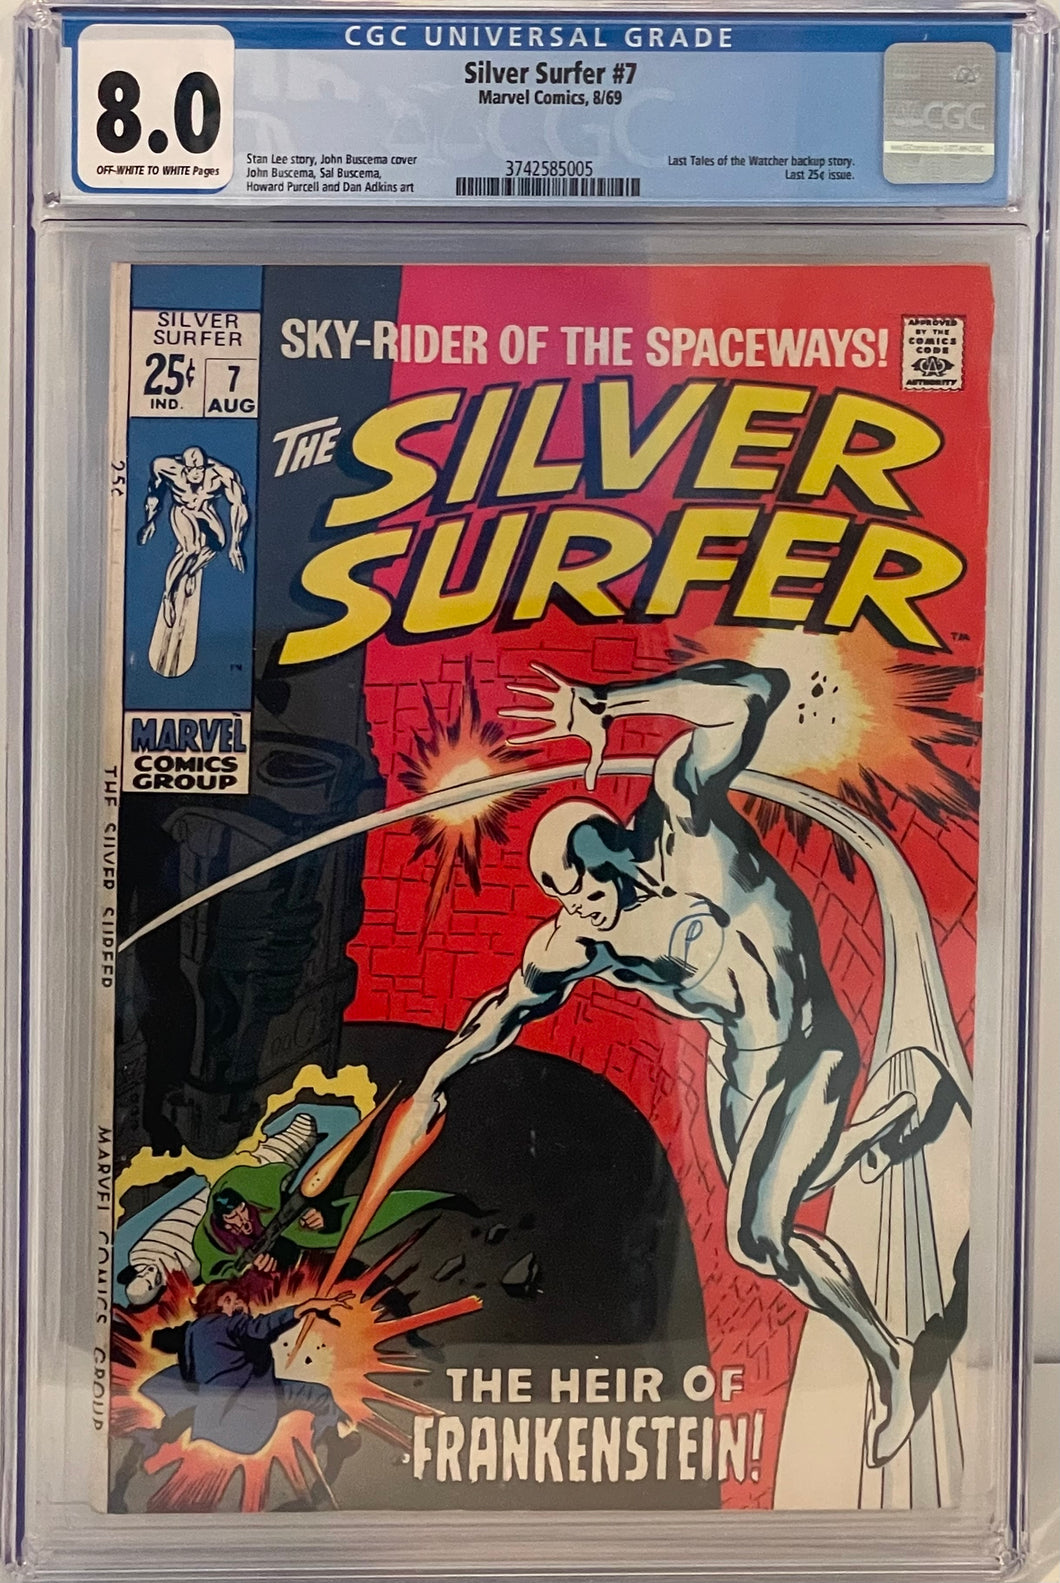 The Silver Surfer #7 8.0 CGC